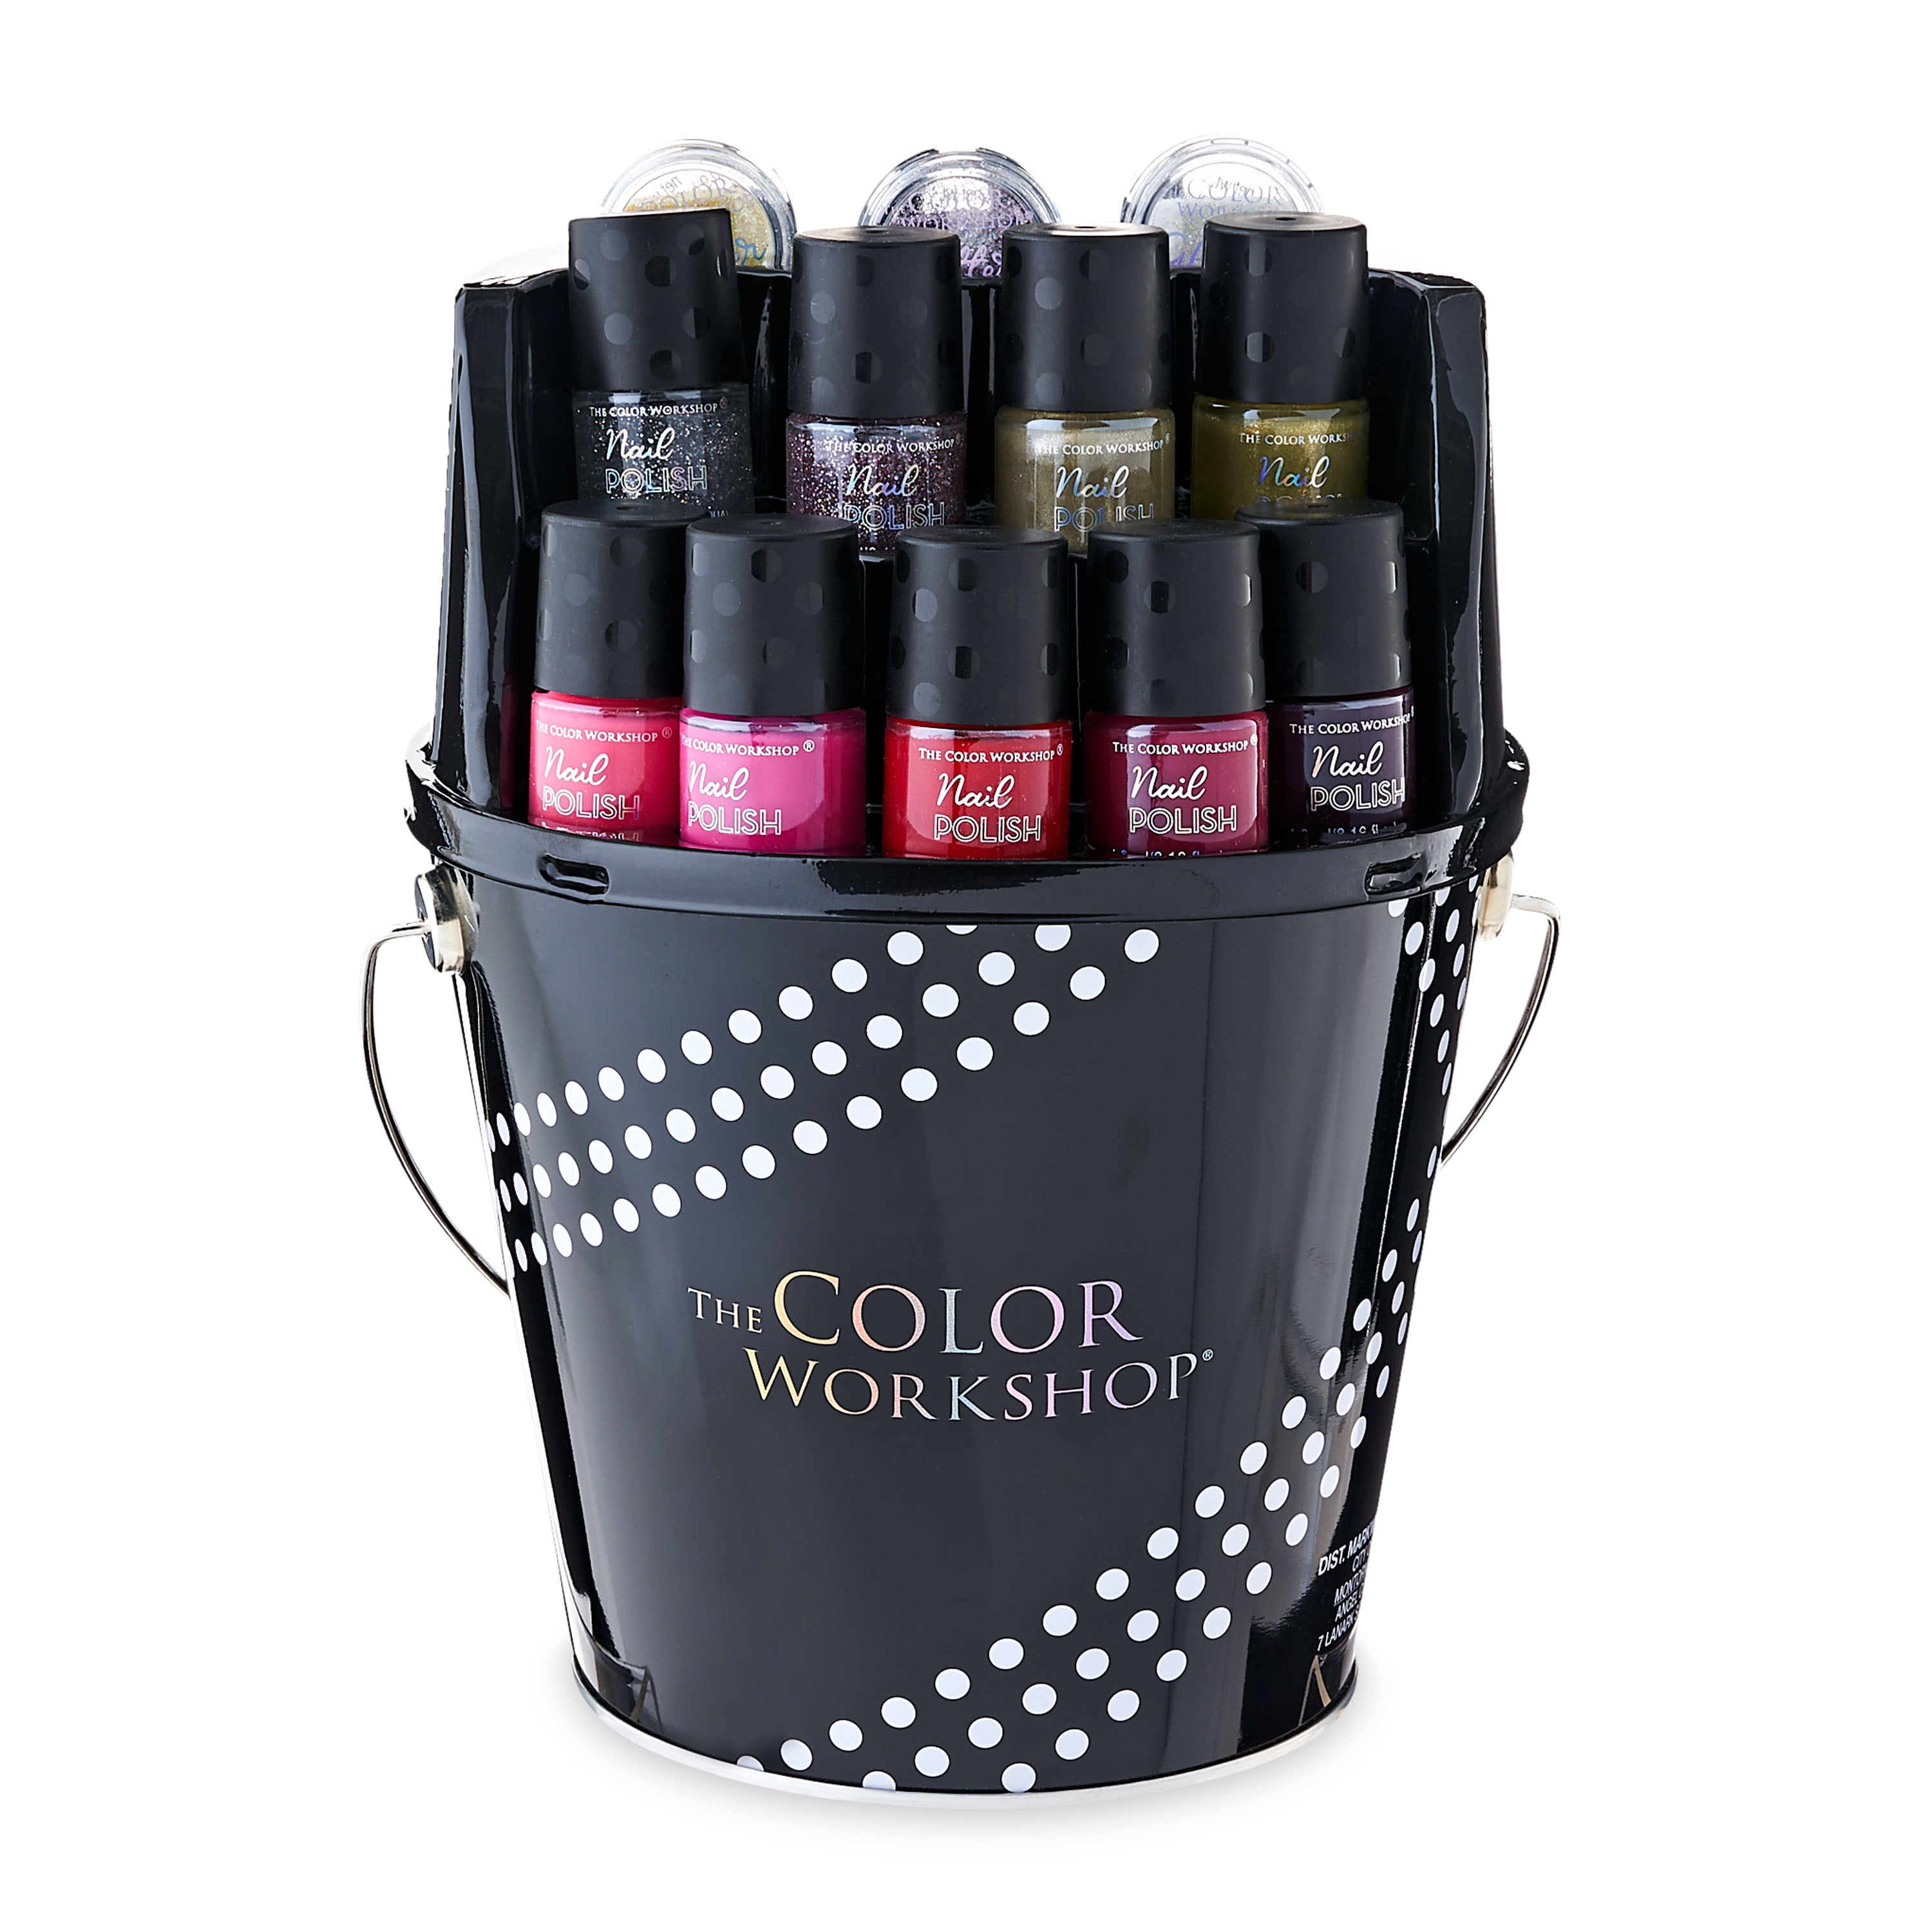 Markwins Beauty The Color Workshop Holiday Nail Pail Gift Set, 15 Piece Set